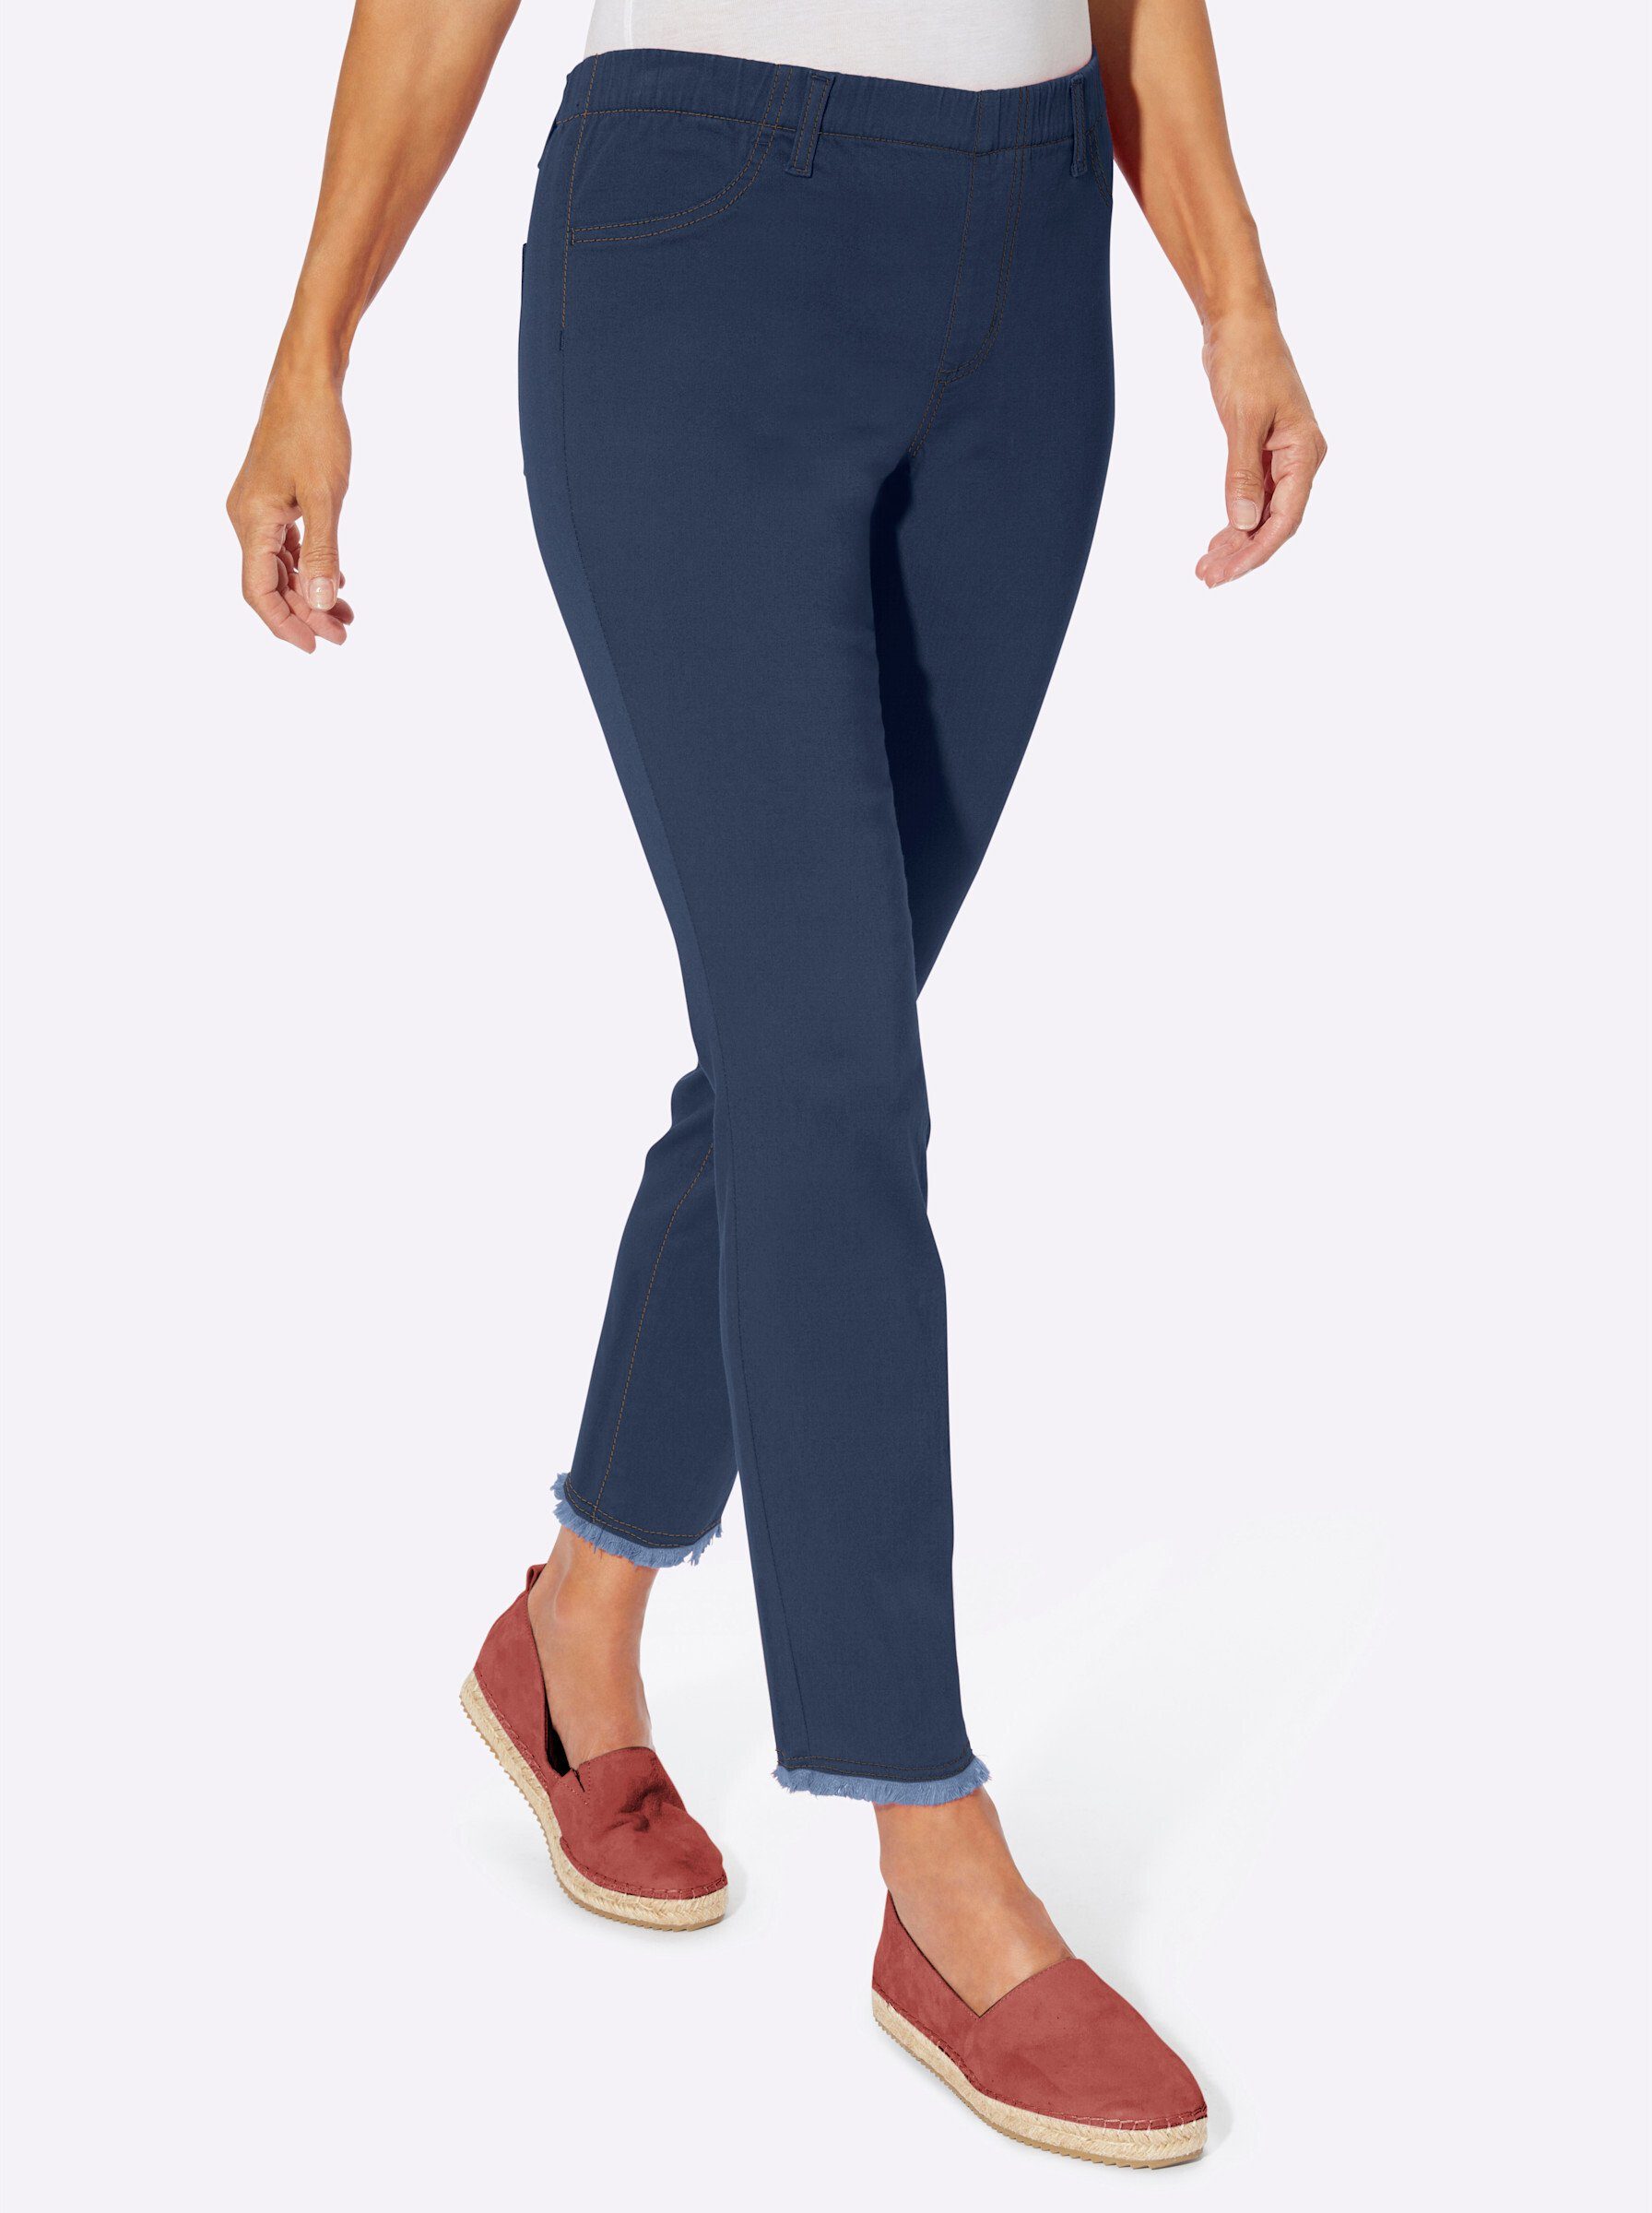 Bequeme Sieh blue-stone-washed Jeans an!